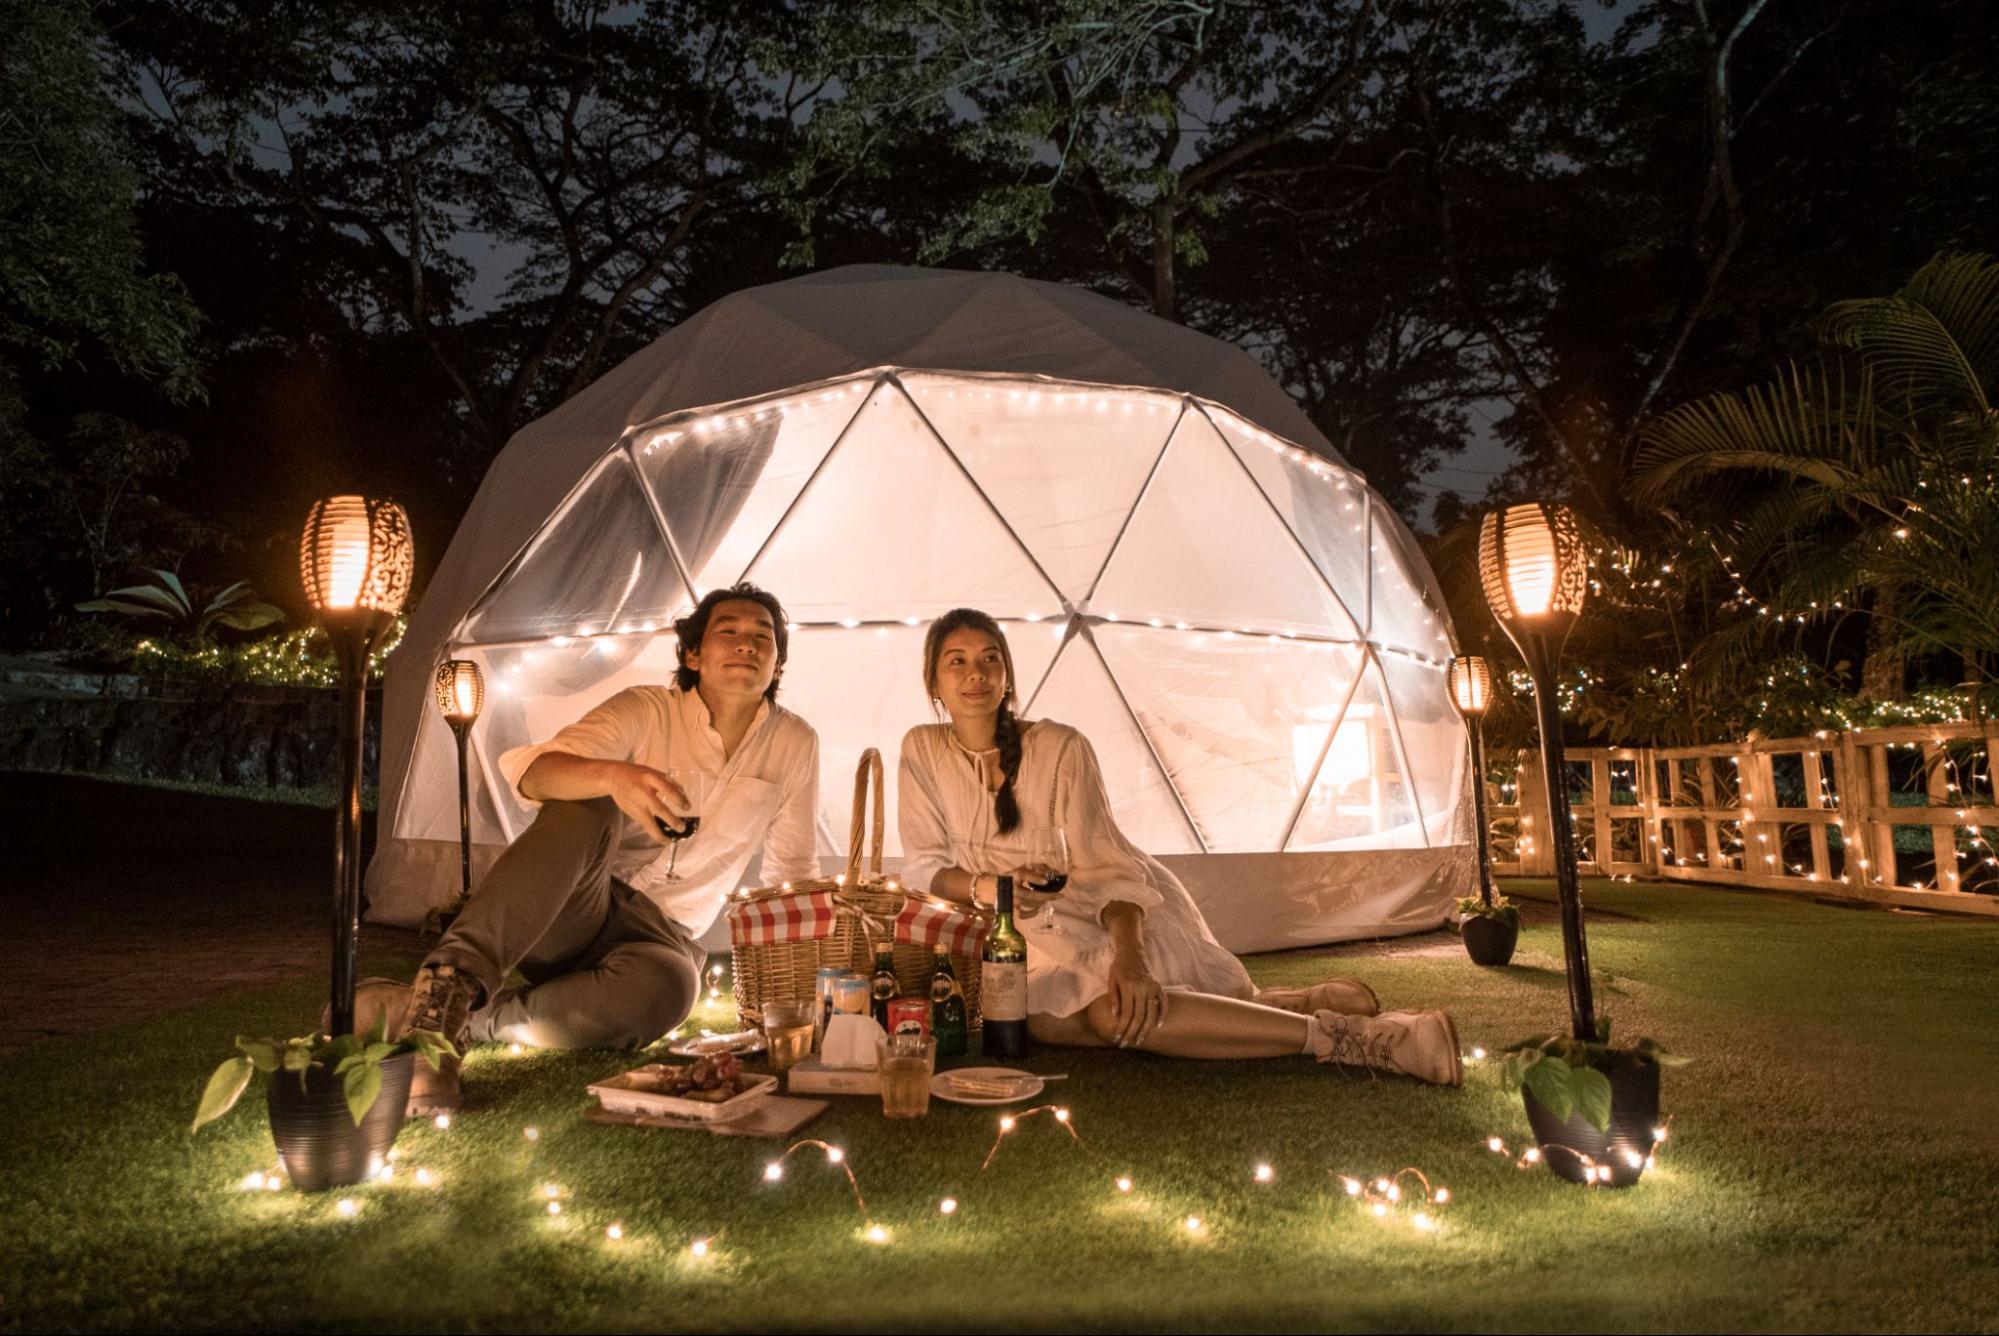 Things to do in Singapore - Singapore Zoo glamping